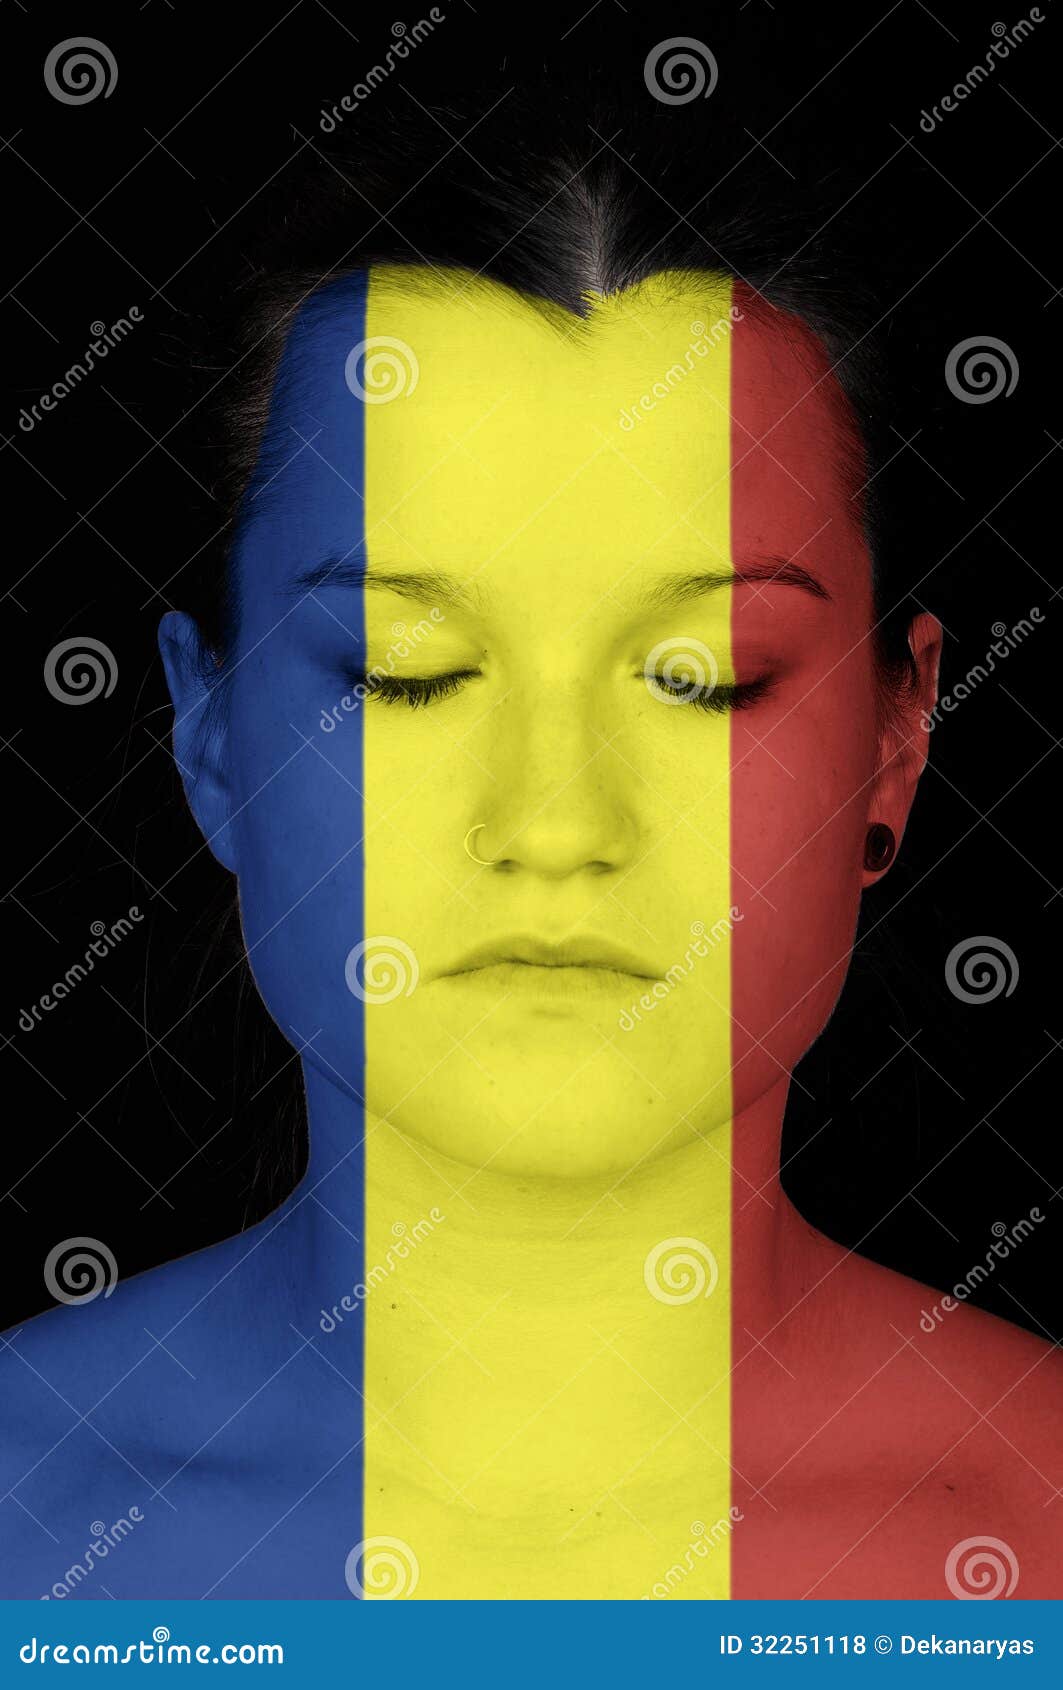 woman with the flag of rumania painted on her face.